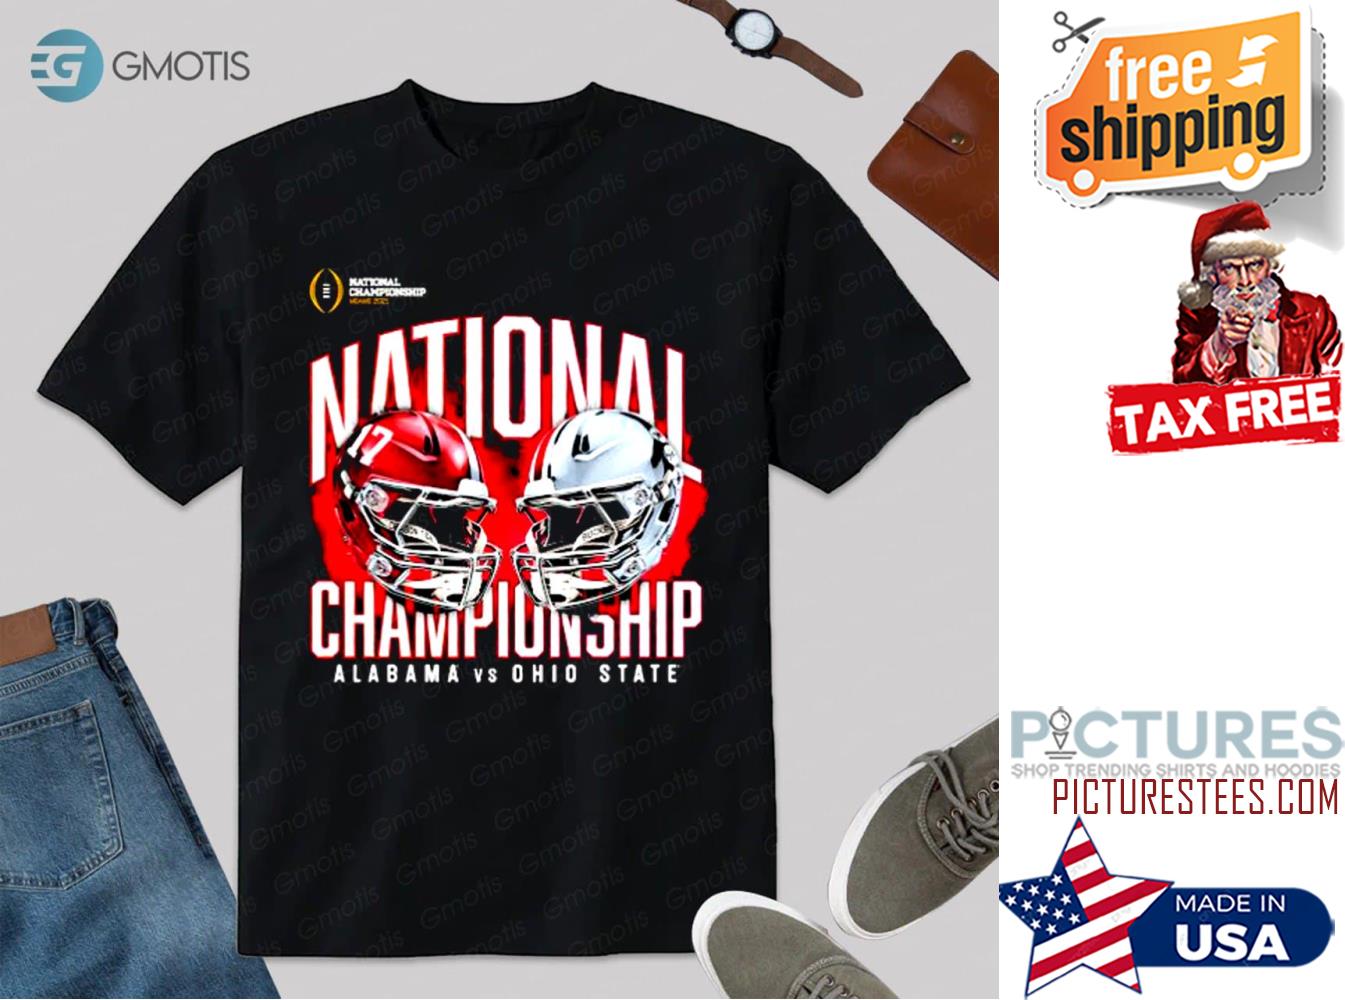 https://images.picturestees.com/2022/01/alabama-crimson-tide-vs-ohio-state-buckeyes-college-football-playoff-2022-national-championship-shirt-picturestees-shirt.jpg